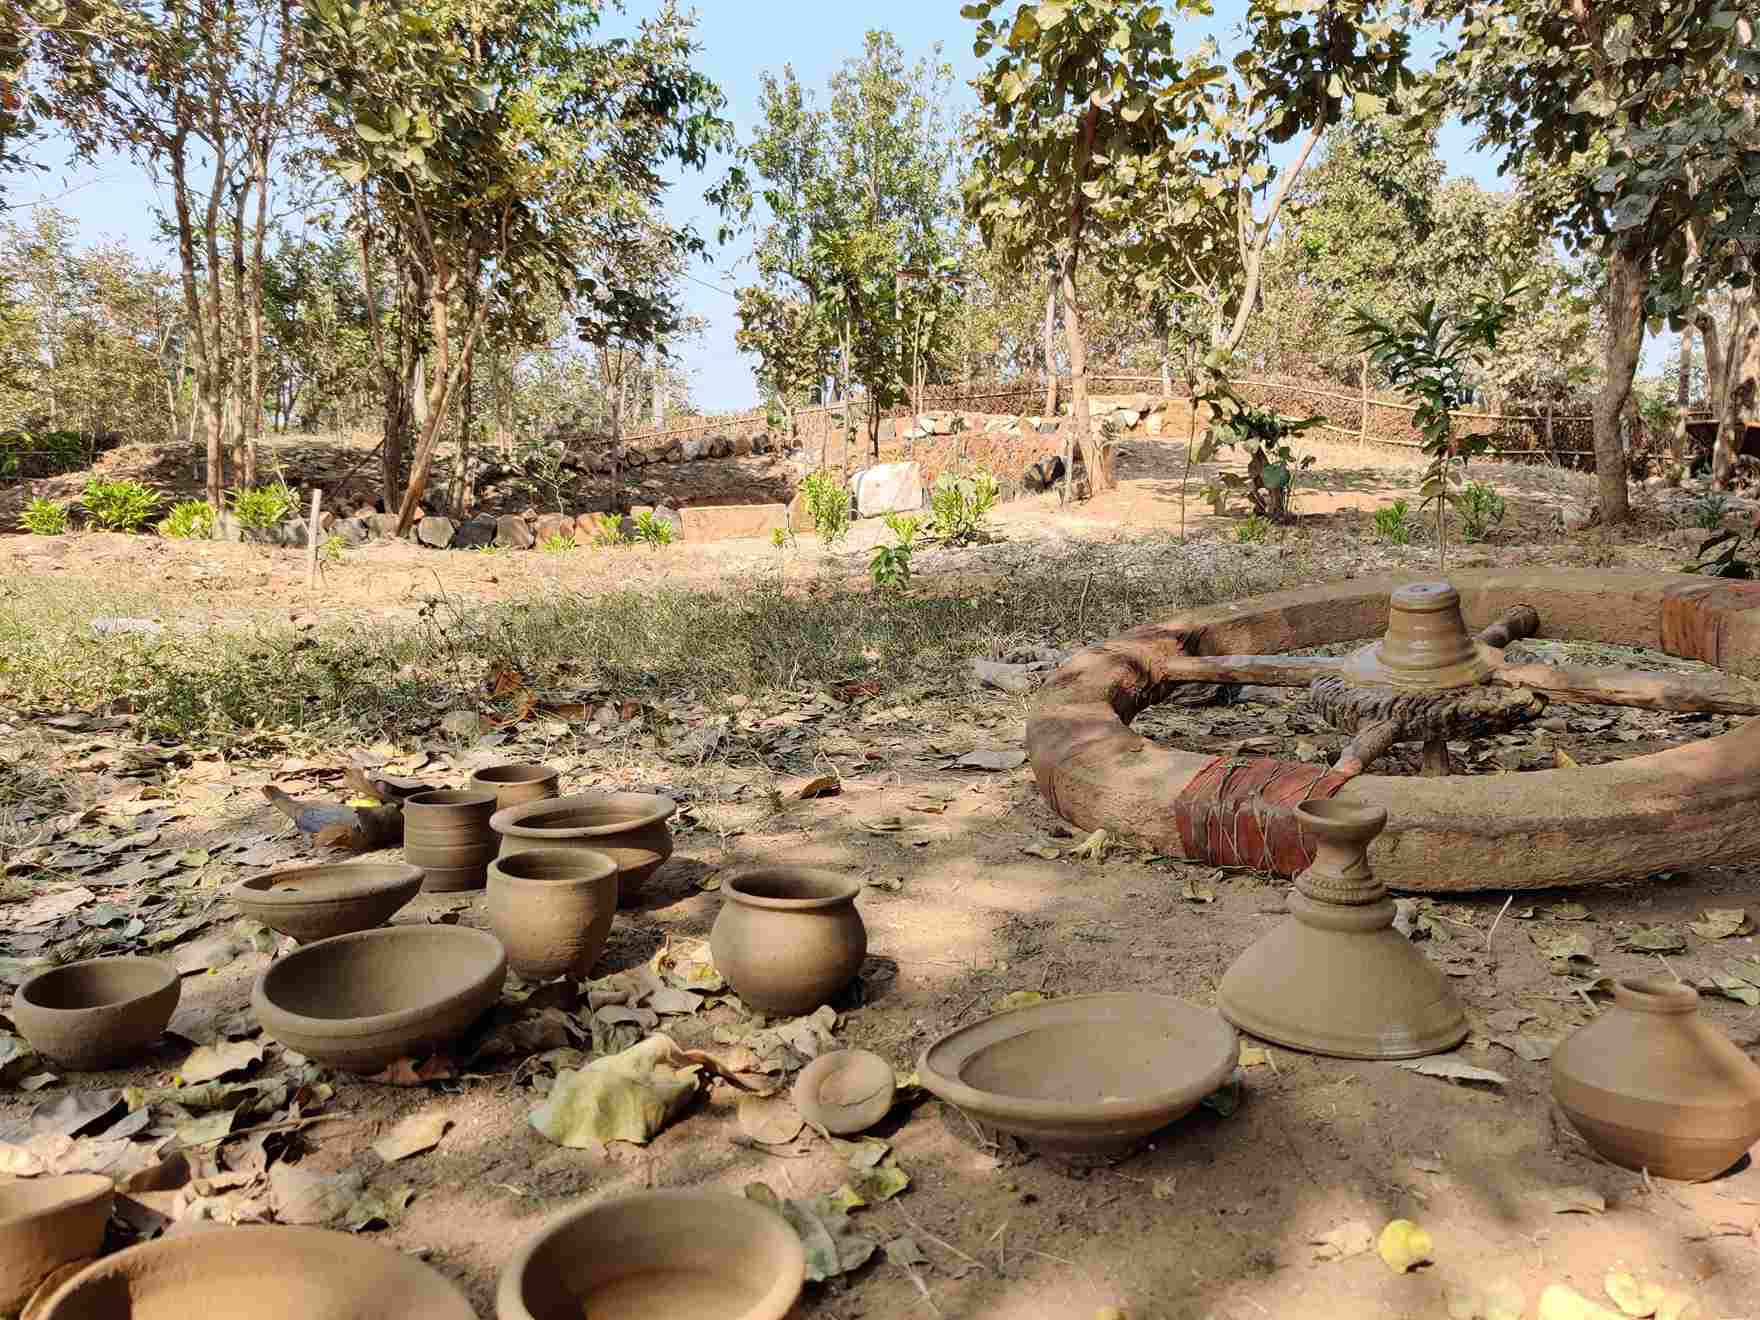 Guests can witness pottery at the village Boda where machines are not used.